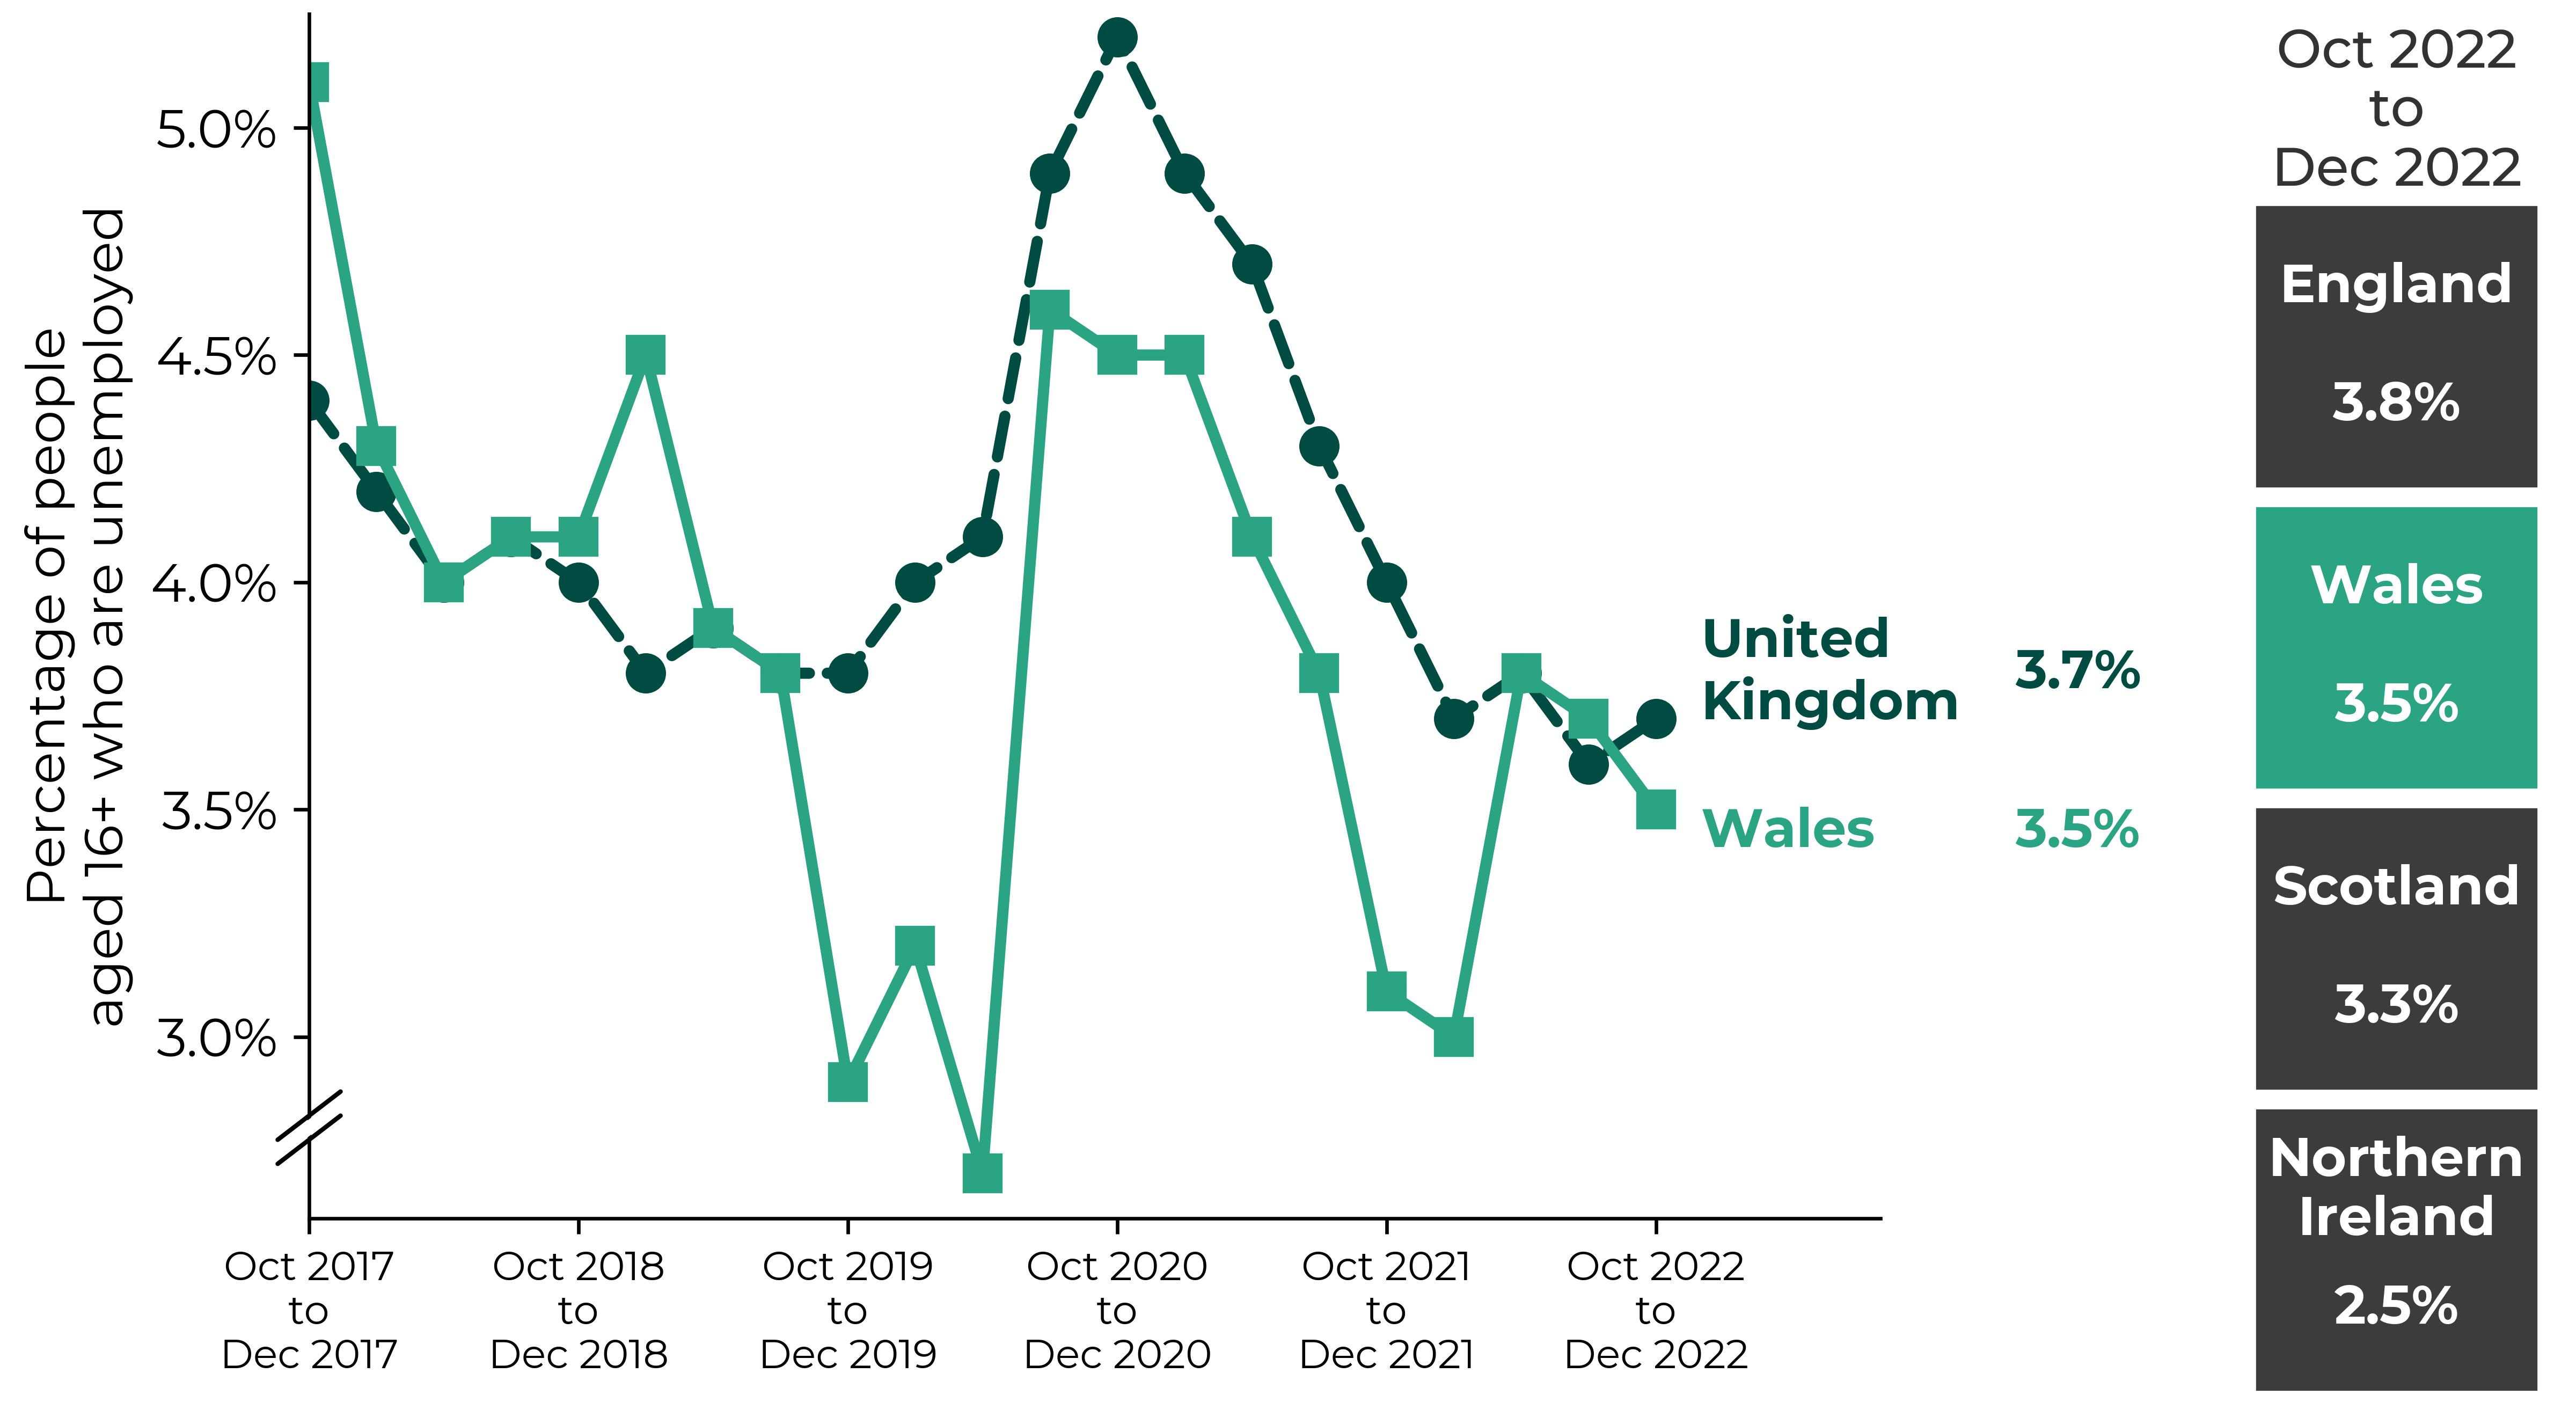 Graph showing an overall decrease in Wales' unemployment rate from over 4.5% in 2017 to under 3% in early 2020. This was followed by a peak of almost 5% during the period December 2020 to February 2021. UK unemployment rate followed a similar pattern. Figures for the latest period (October 2022 to December 2022) are Northern Ireland 2.5%, Scotland 3.3%, Wales 3.5%, England 3.8% and UK 3.7%.